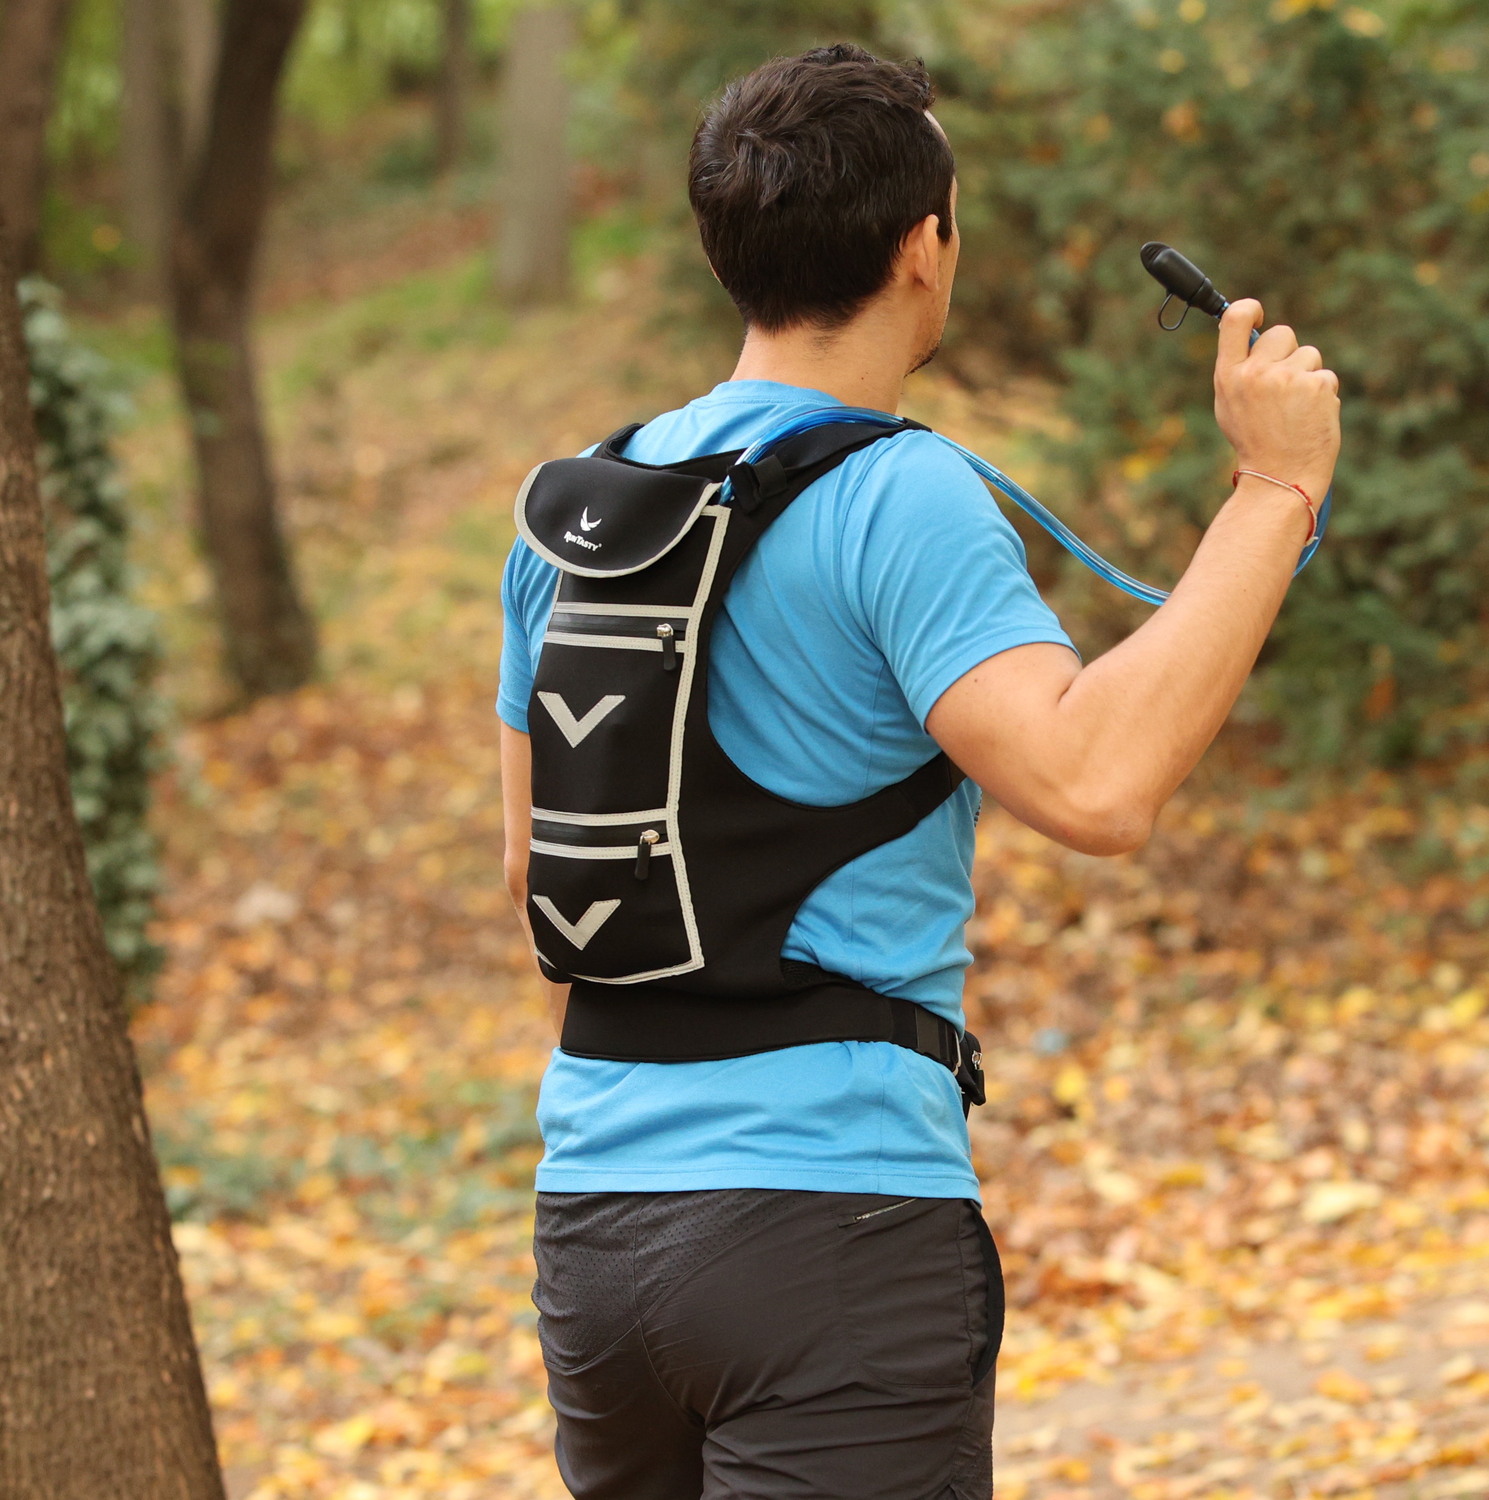 Runtasty Hydratouch Hydration Backpack Vest - Ideal for Running, Walking, Cycling, Hiking, Climbing and more!